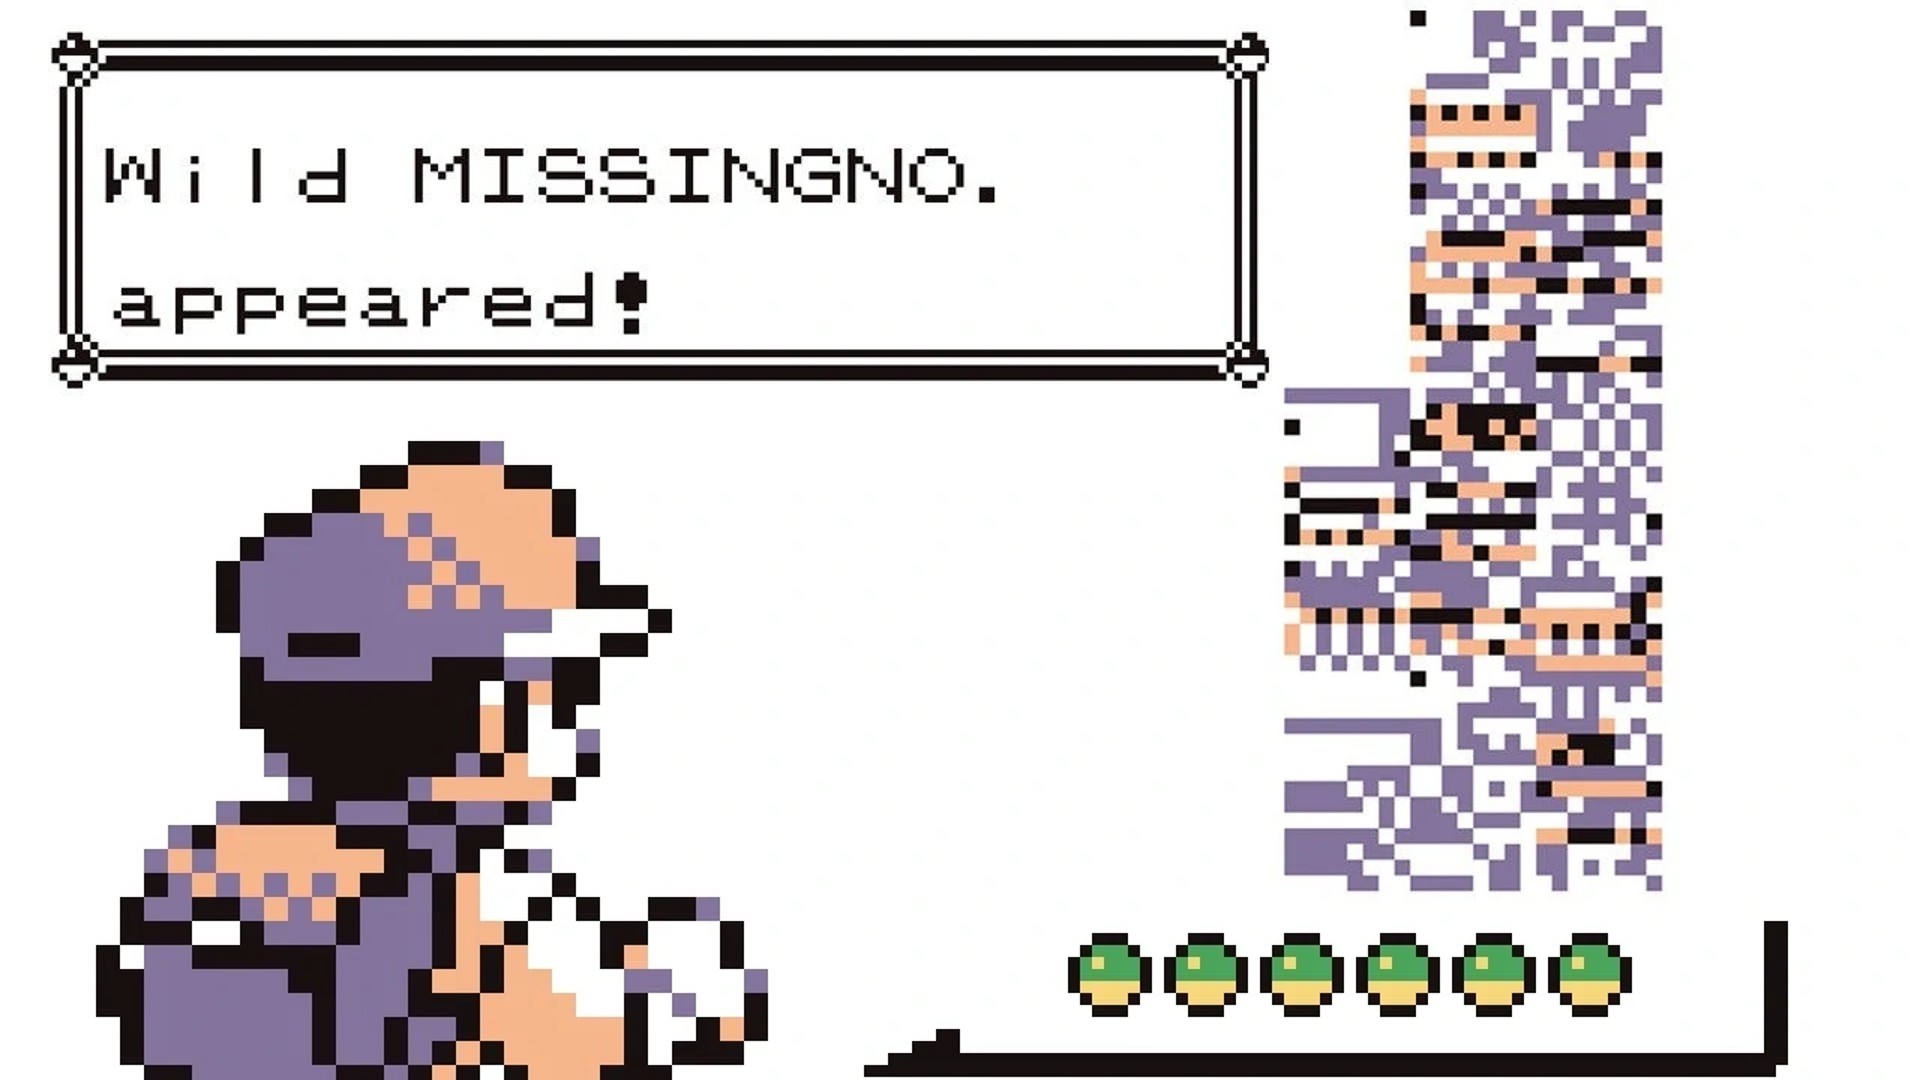 MissingNo is an unofficial glitch Pokemon in Pokemon Red and Blue